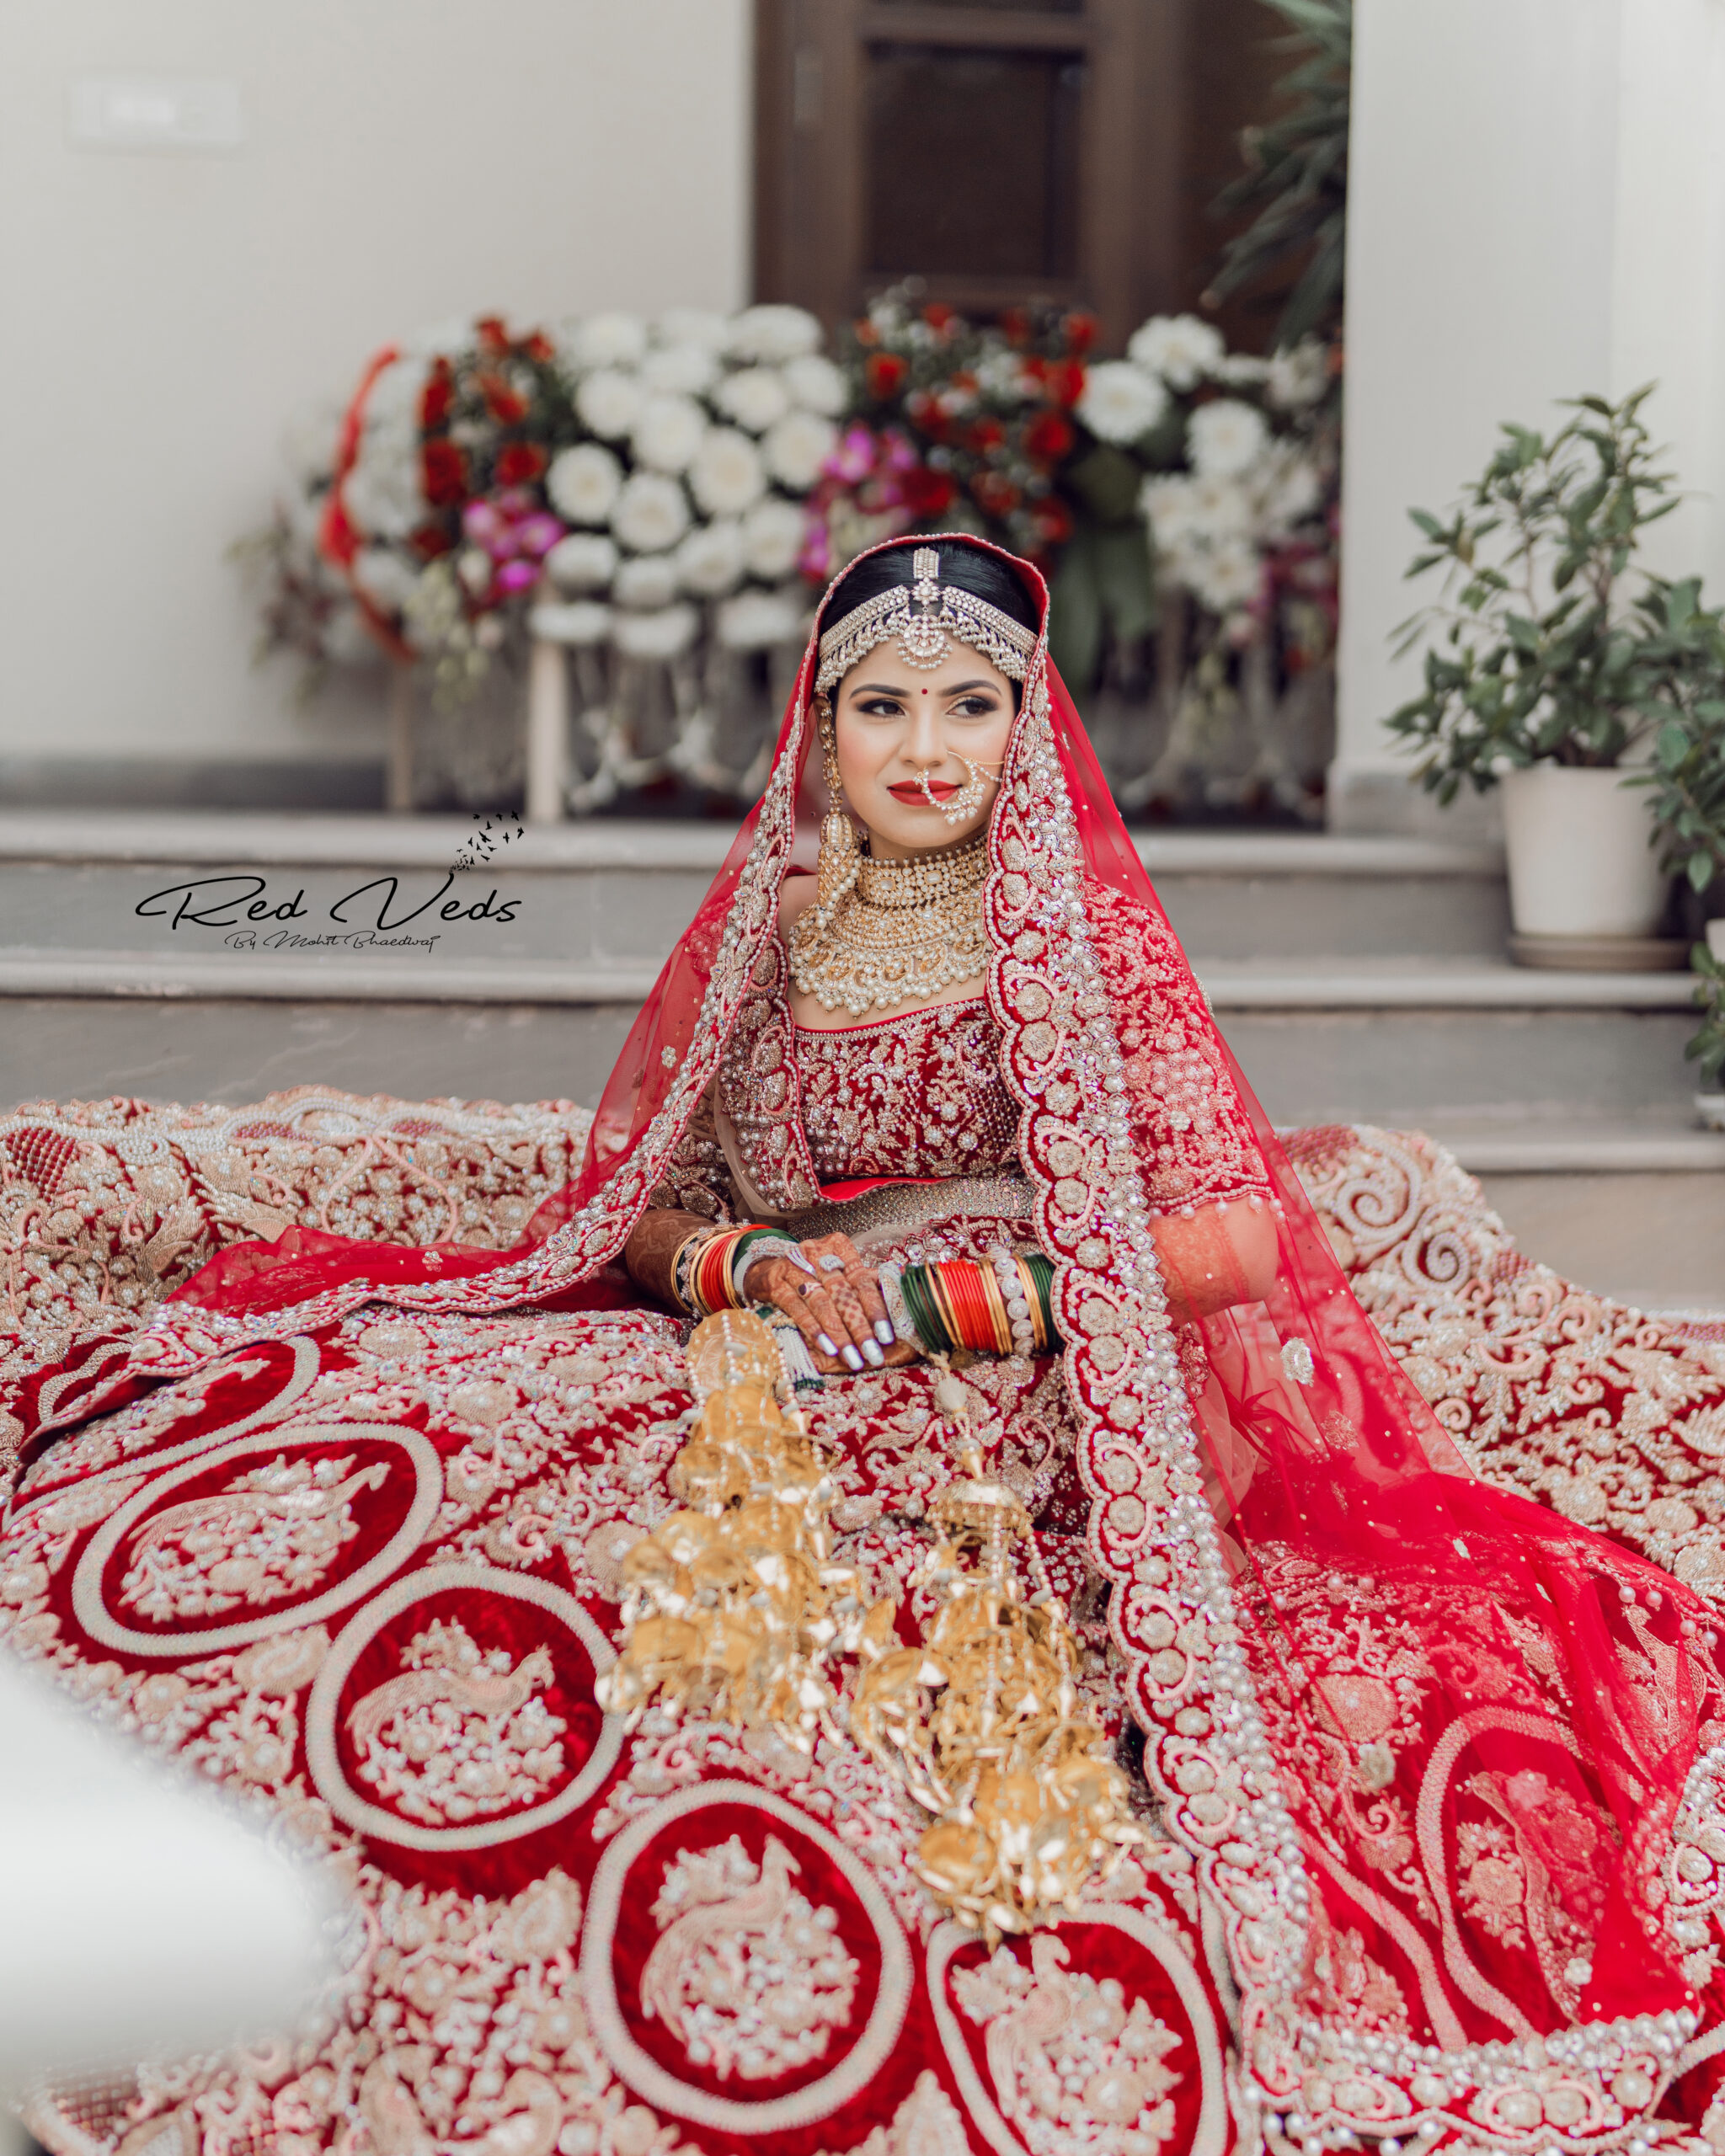 Image by:Photo Gems - good pose on sofa | Indian wedding couple, Bridal  poses, Indian wedding gowns